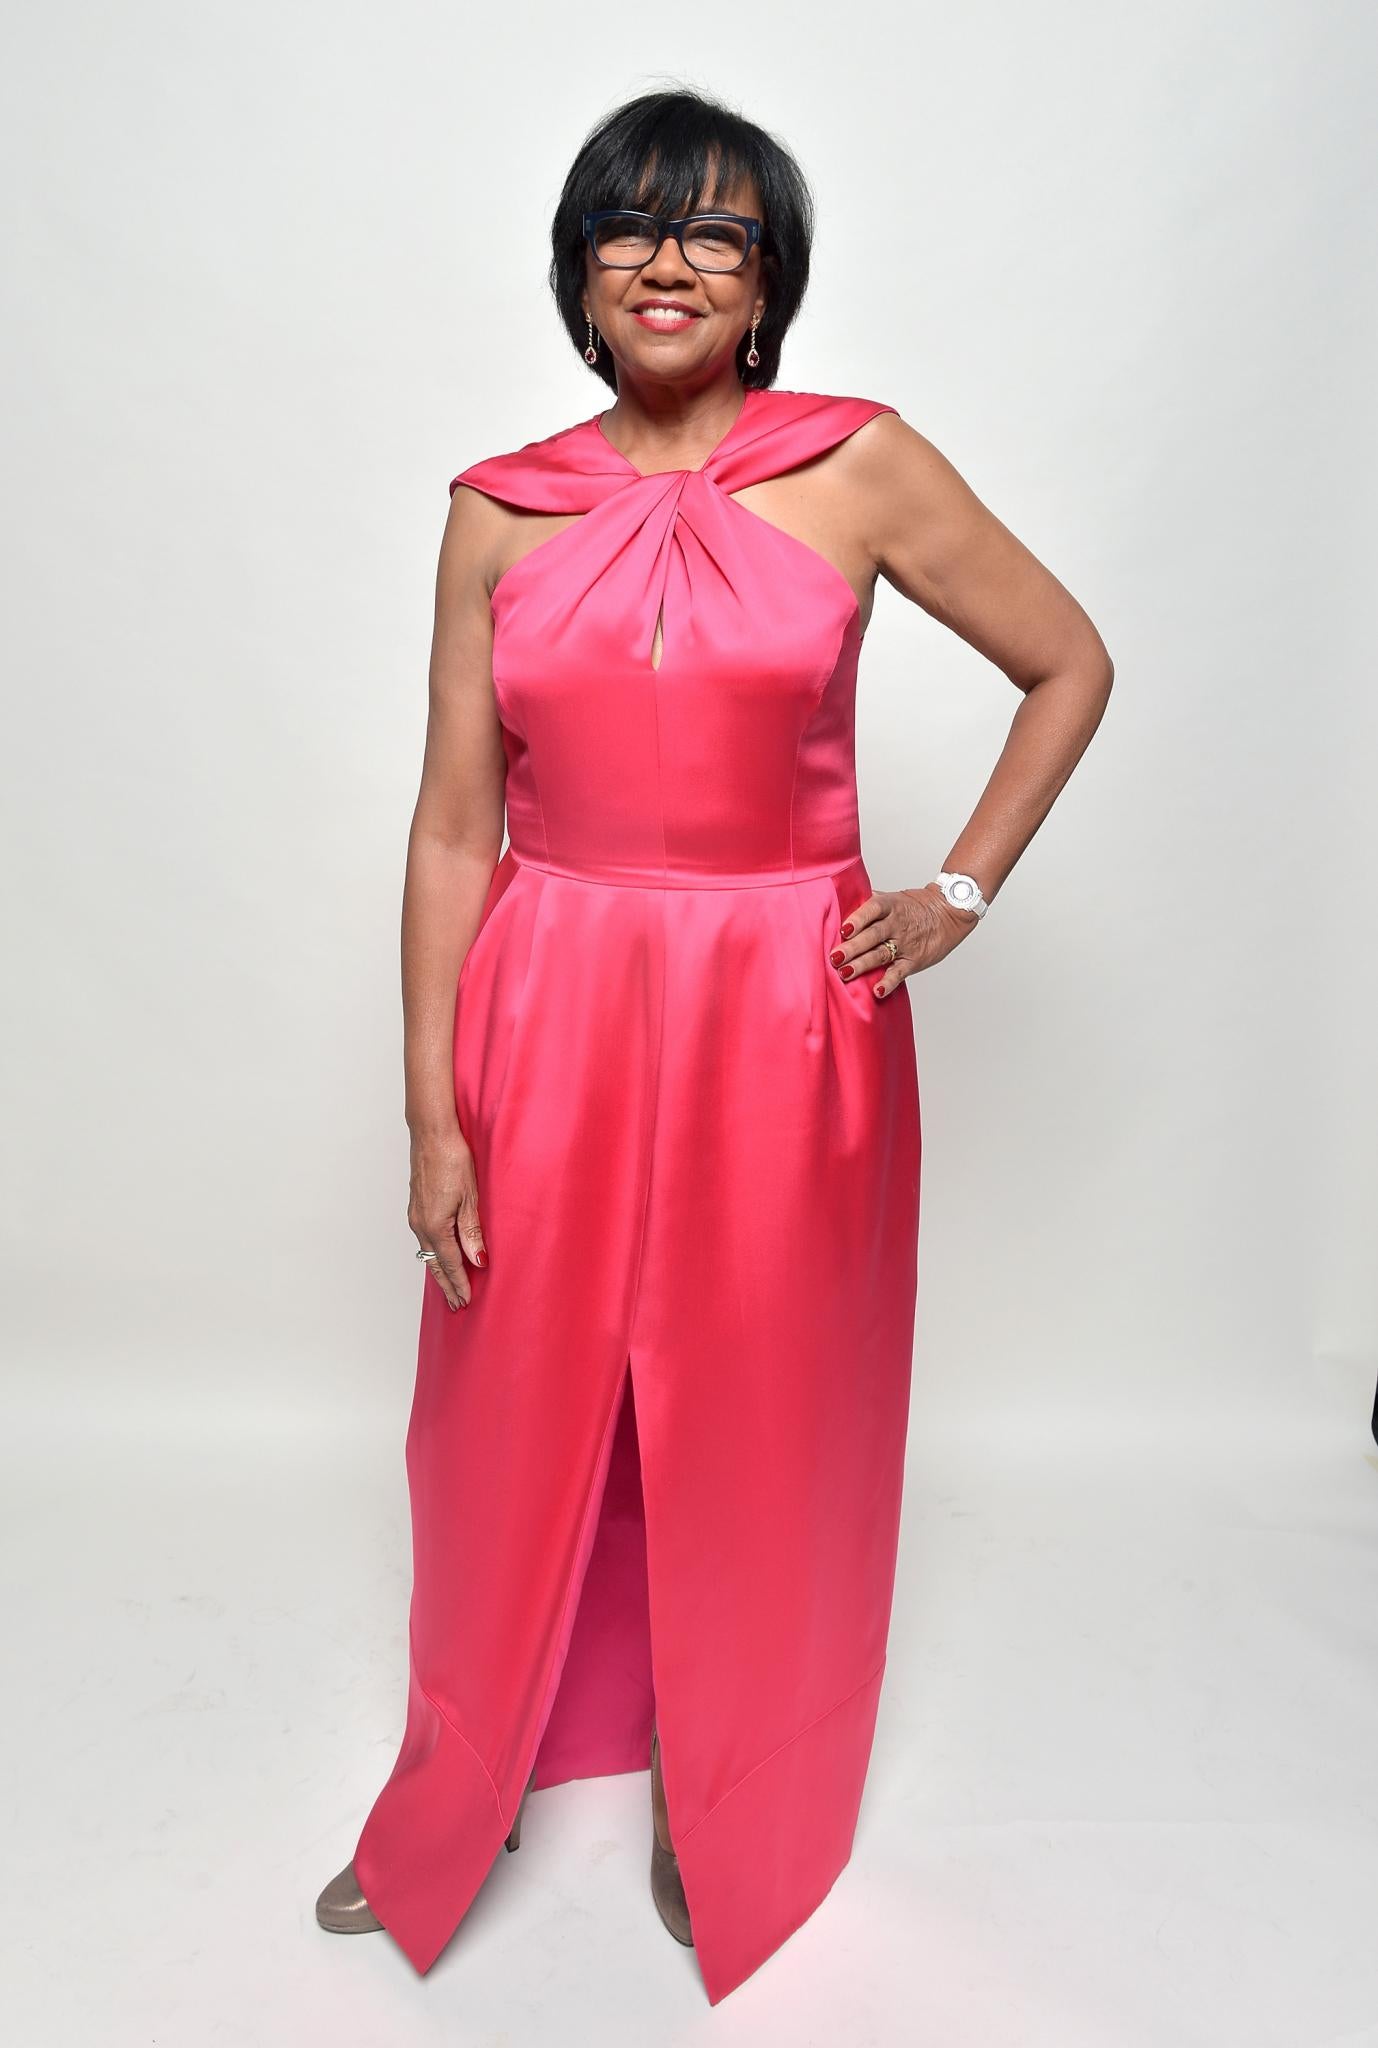 5 Things to Know About ESSENCE Honoree Cheryl Boone Isaacs
